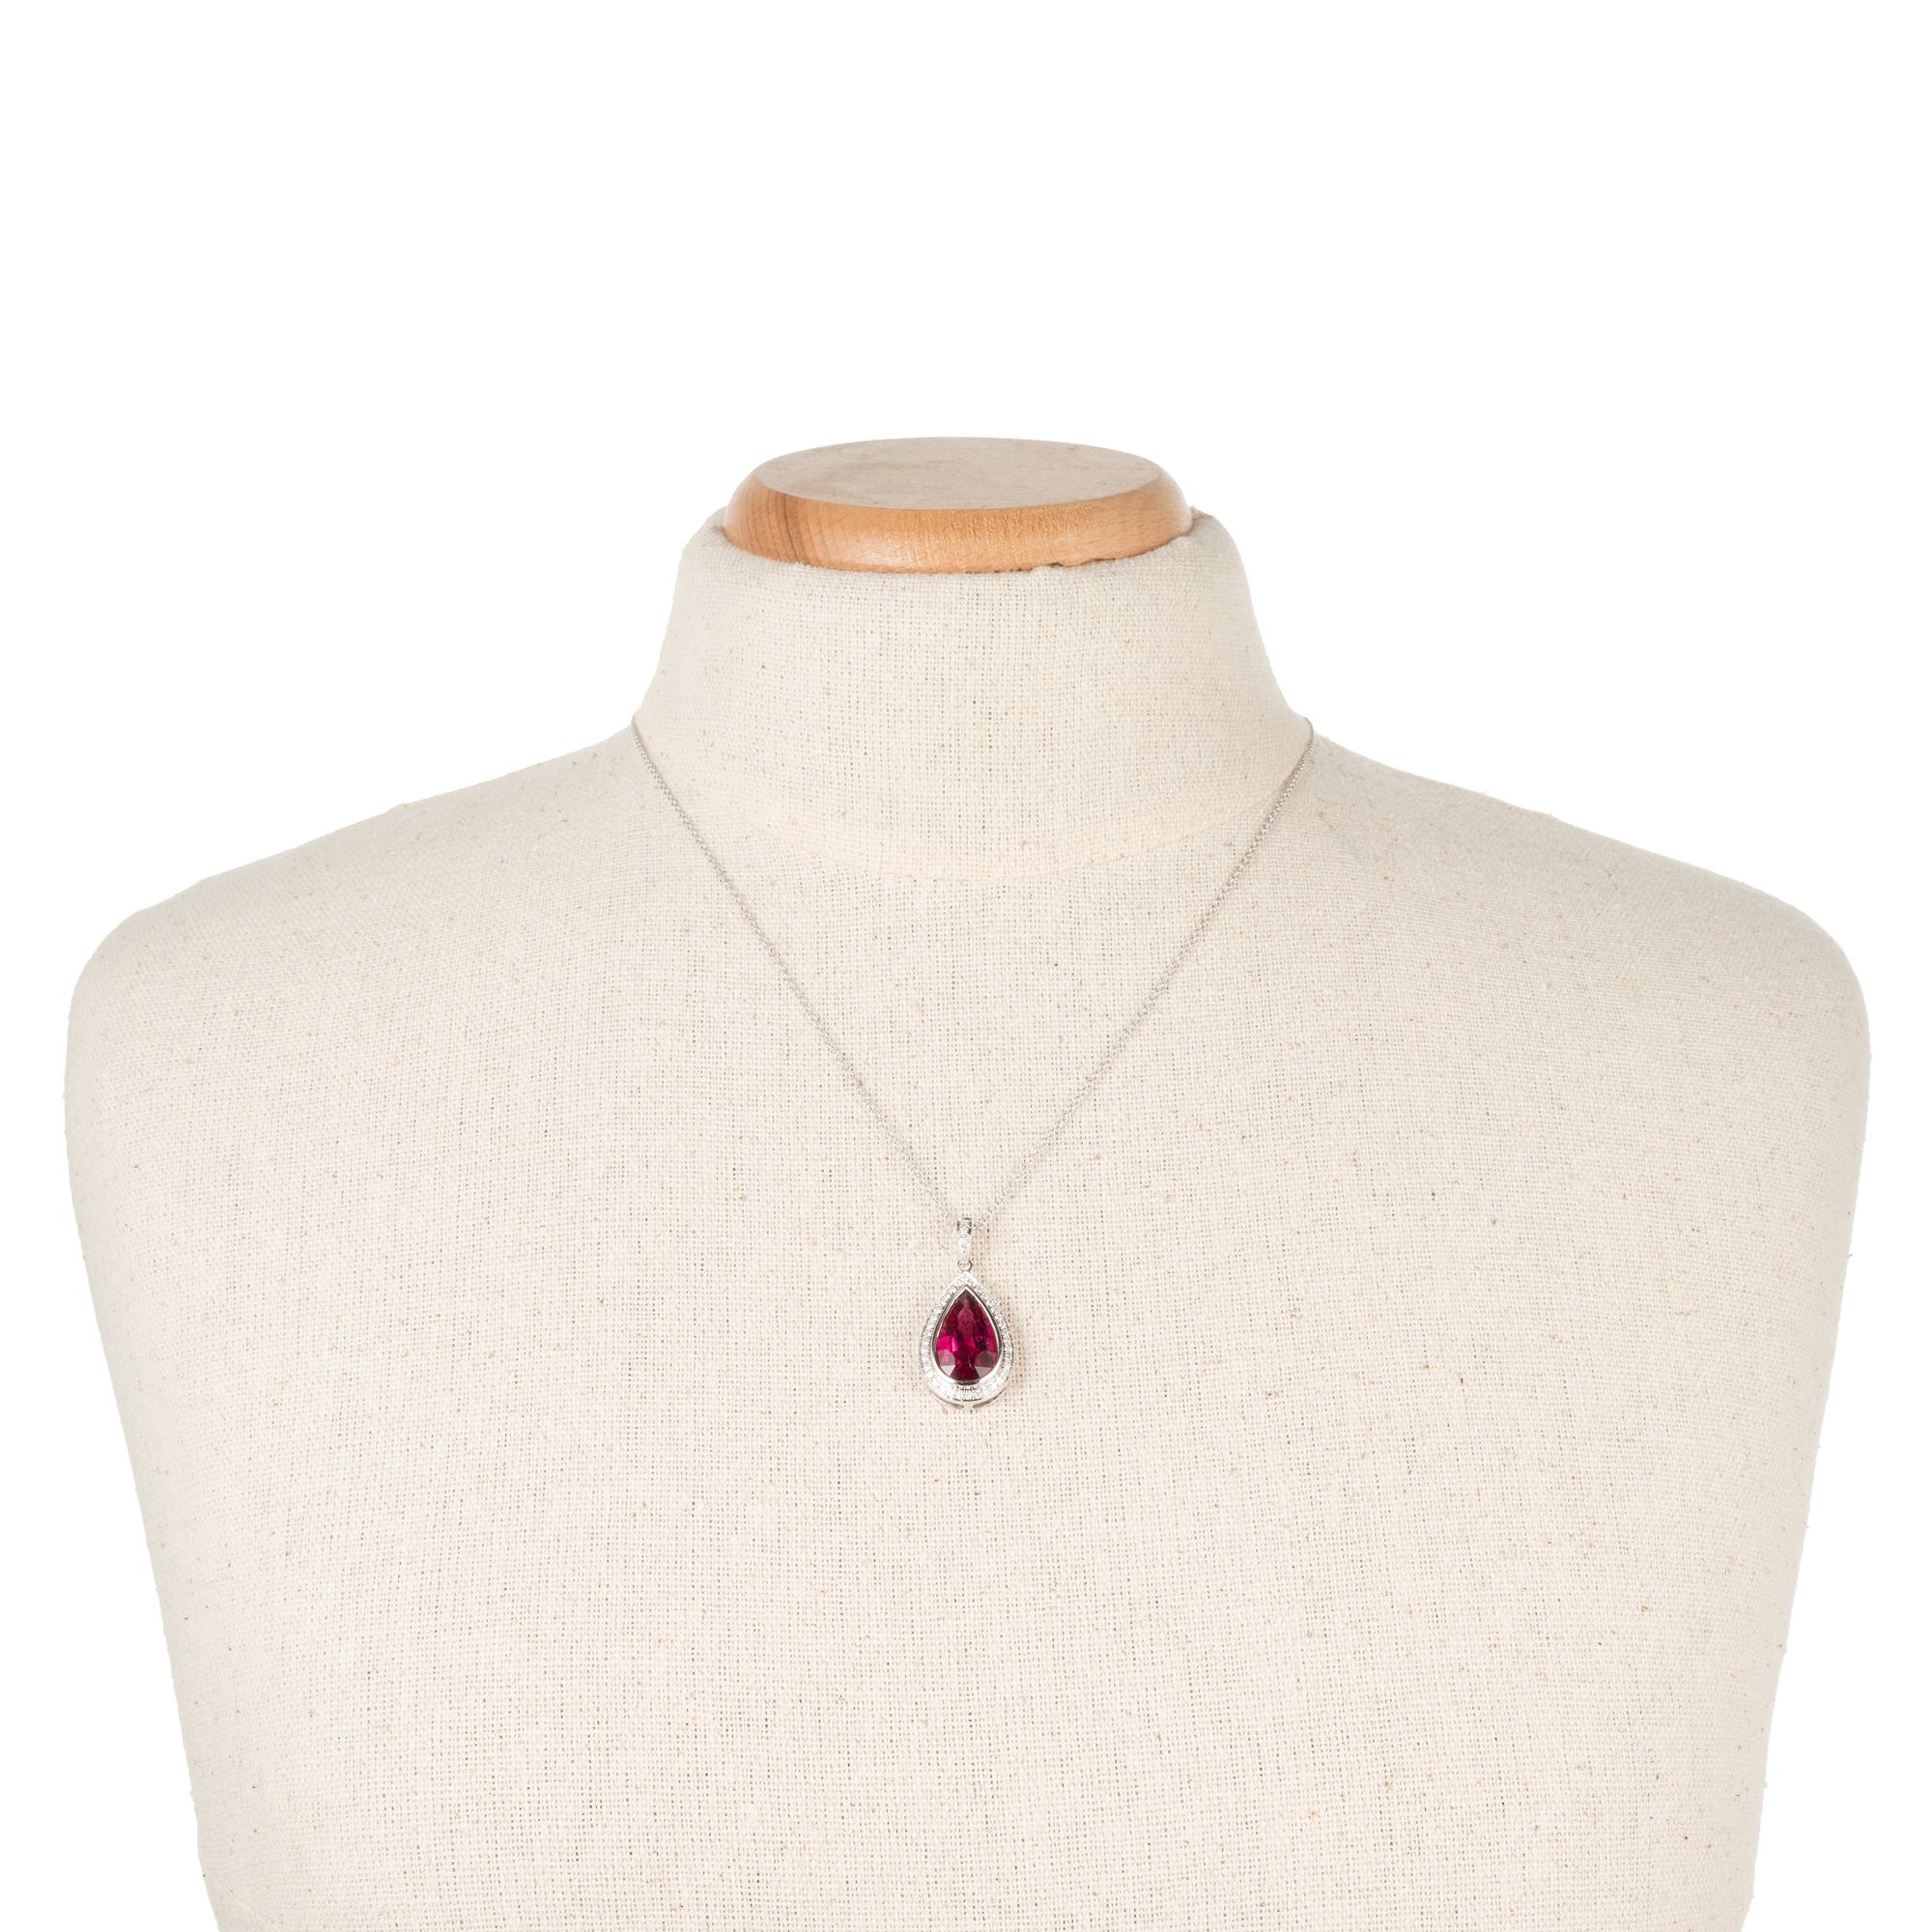 4.46 Carat Pear Pink Tourmaline White Gold Diamond Pendant Necklace In Excellent Condition For Sale In Stamford, CT